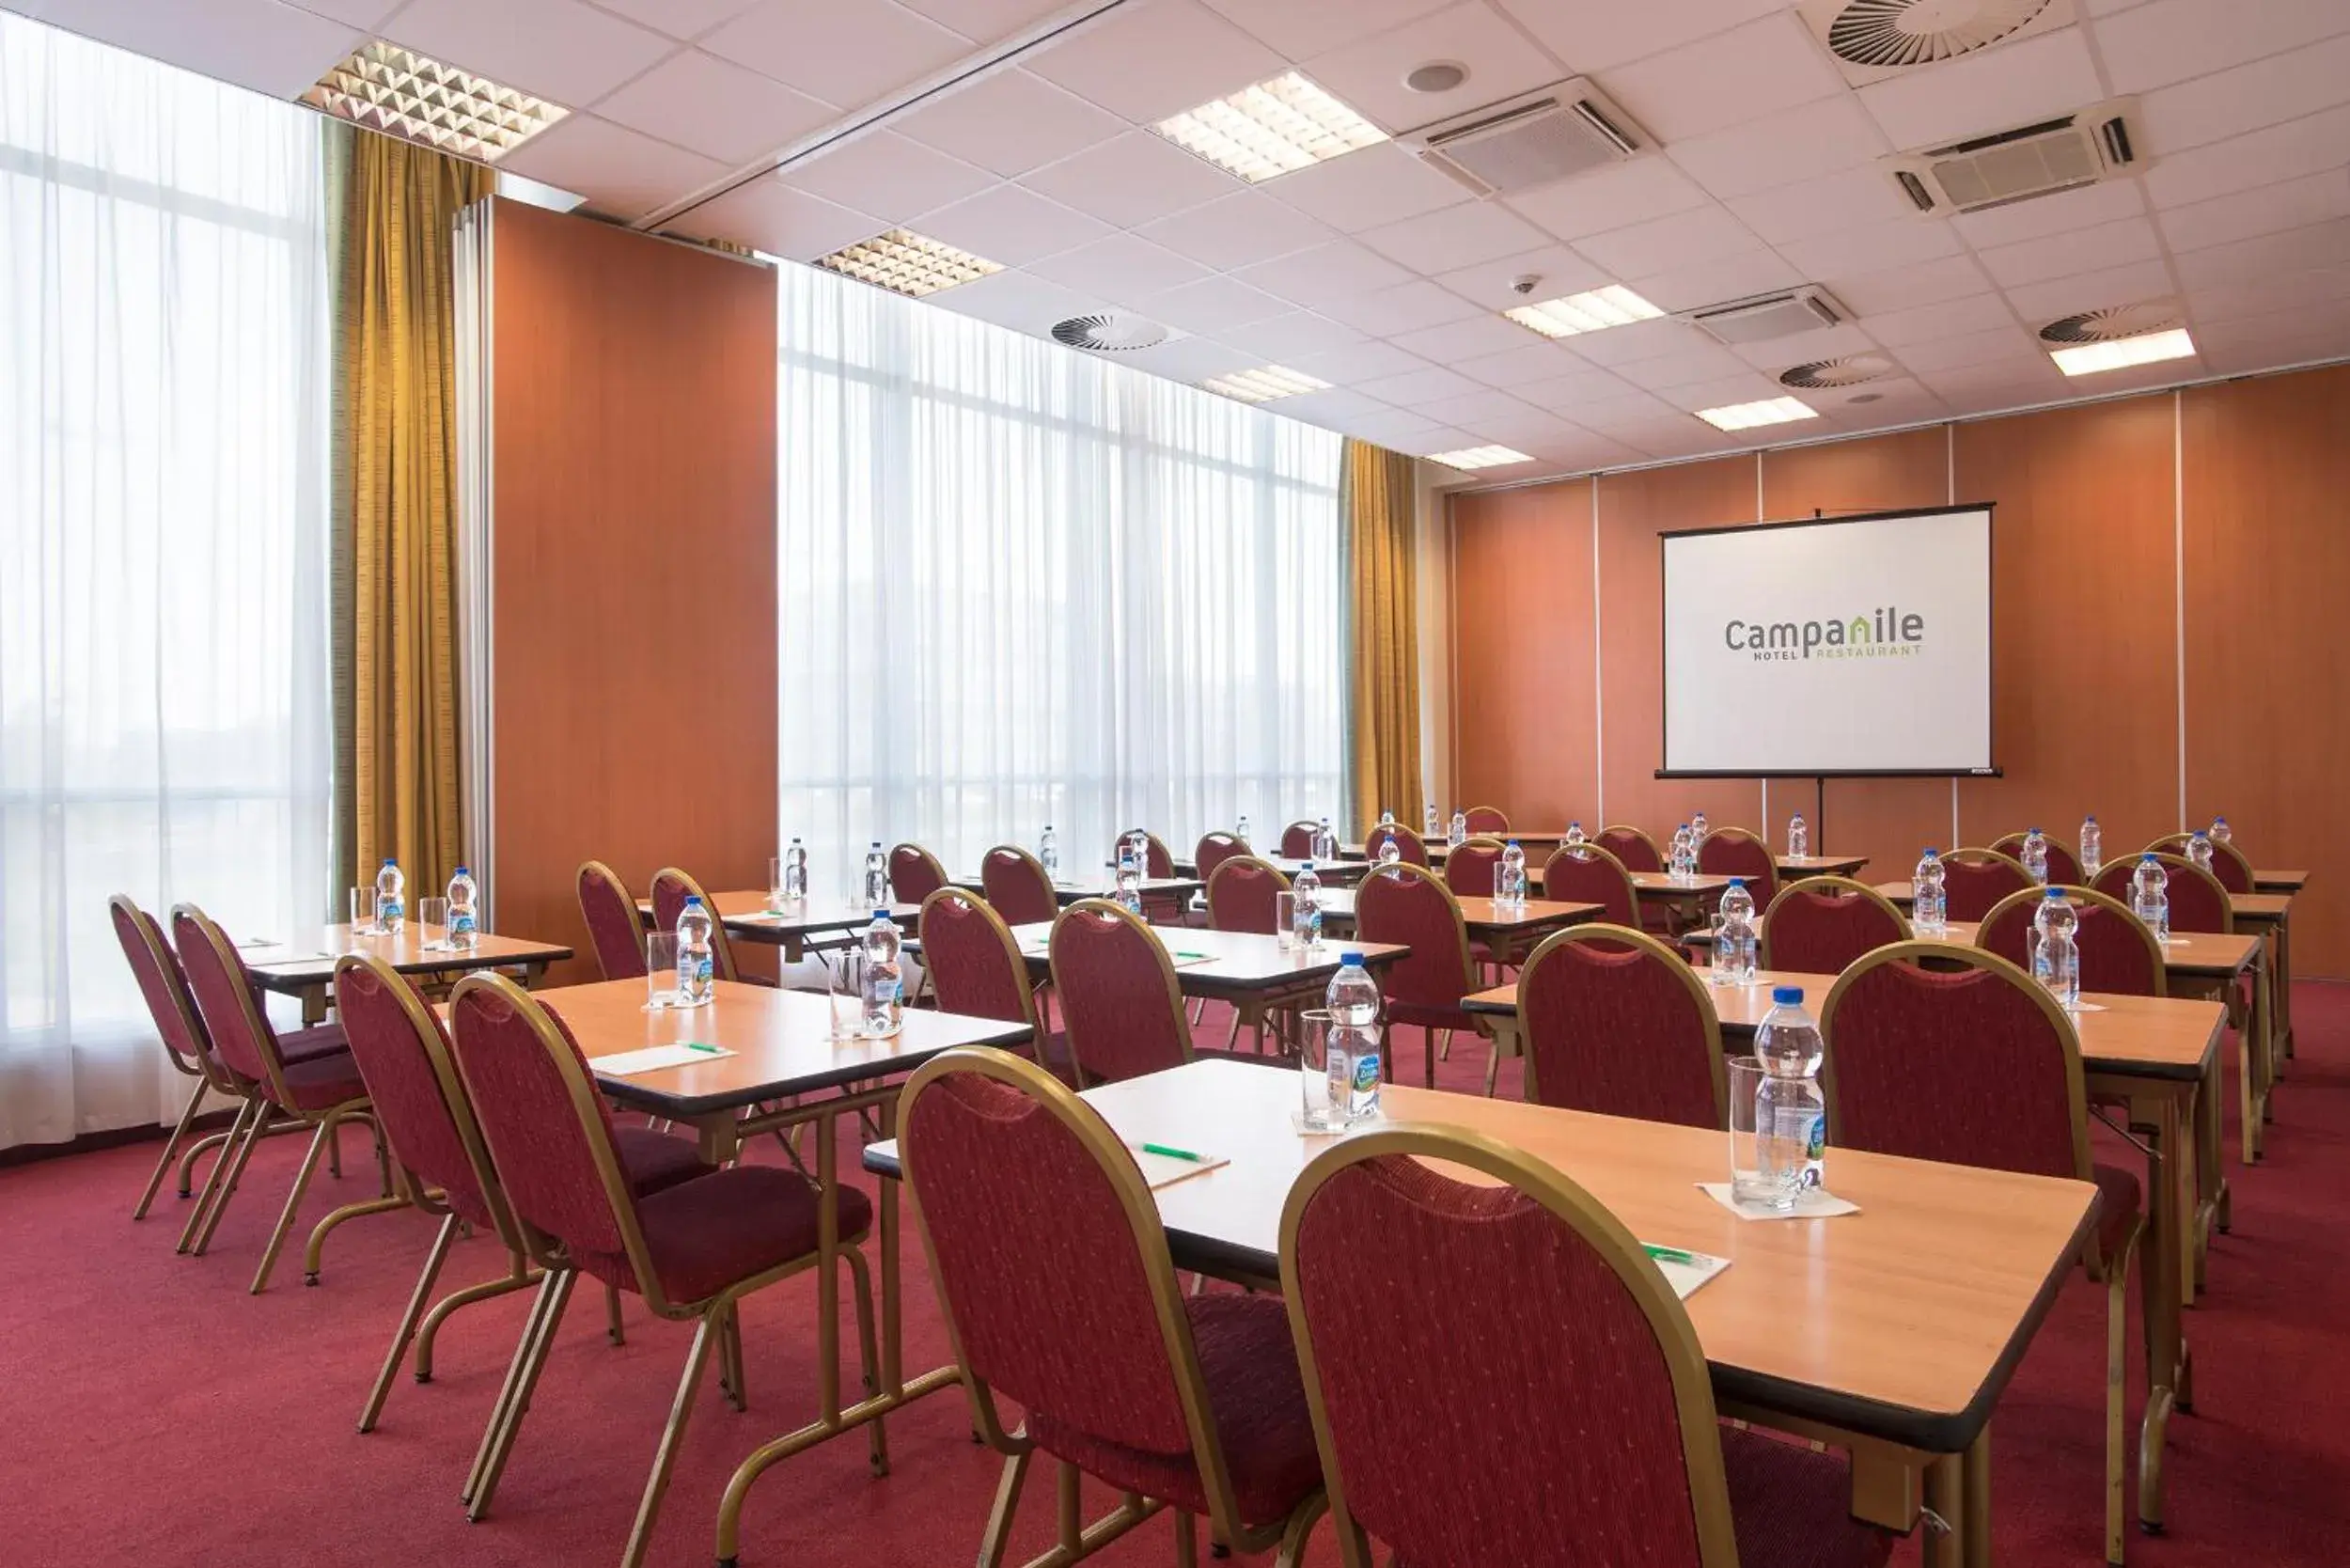 Business facilities in Campanile Hotel Wroclaw